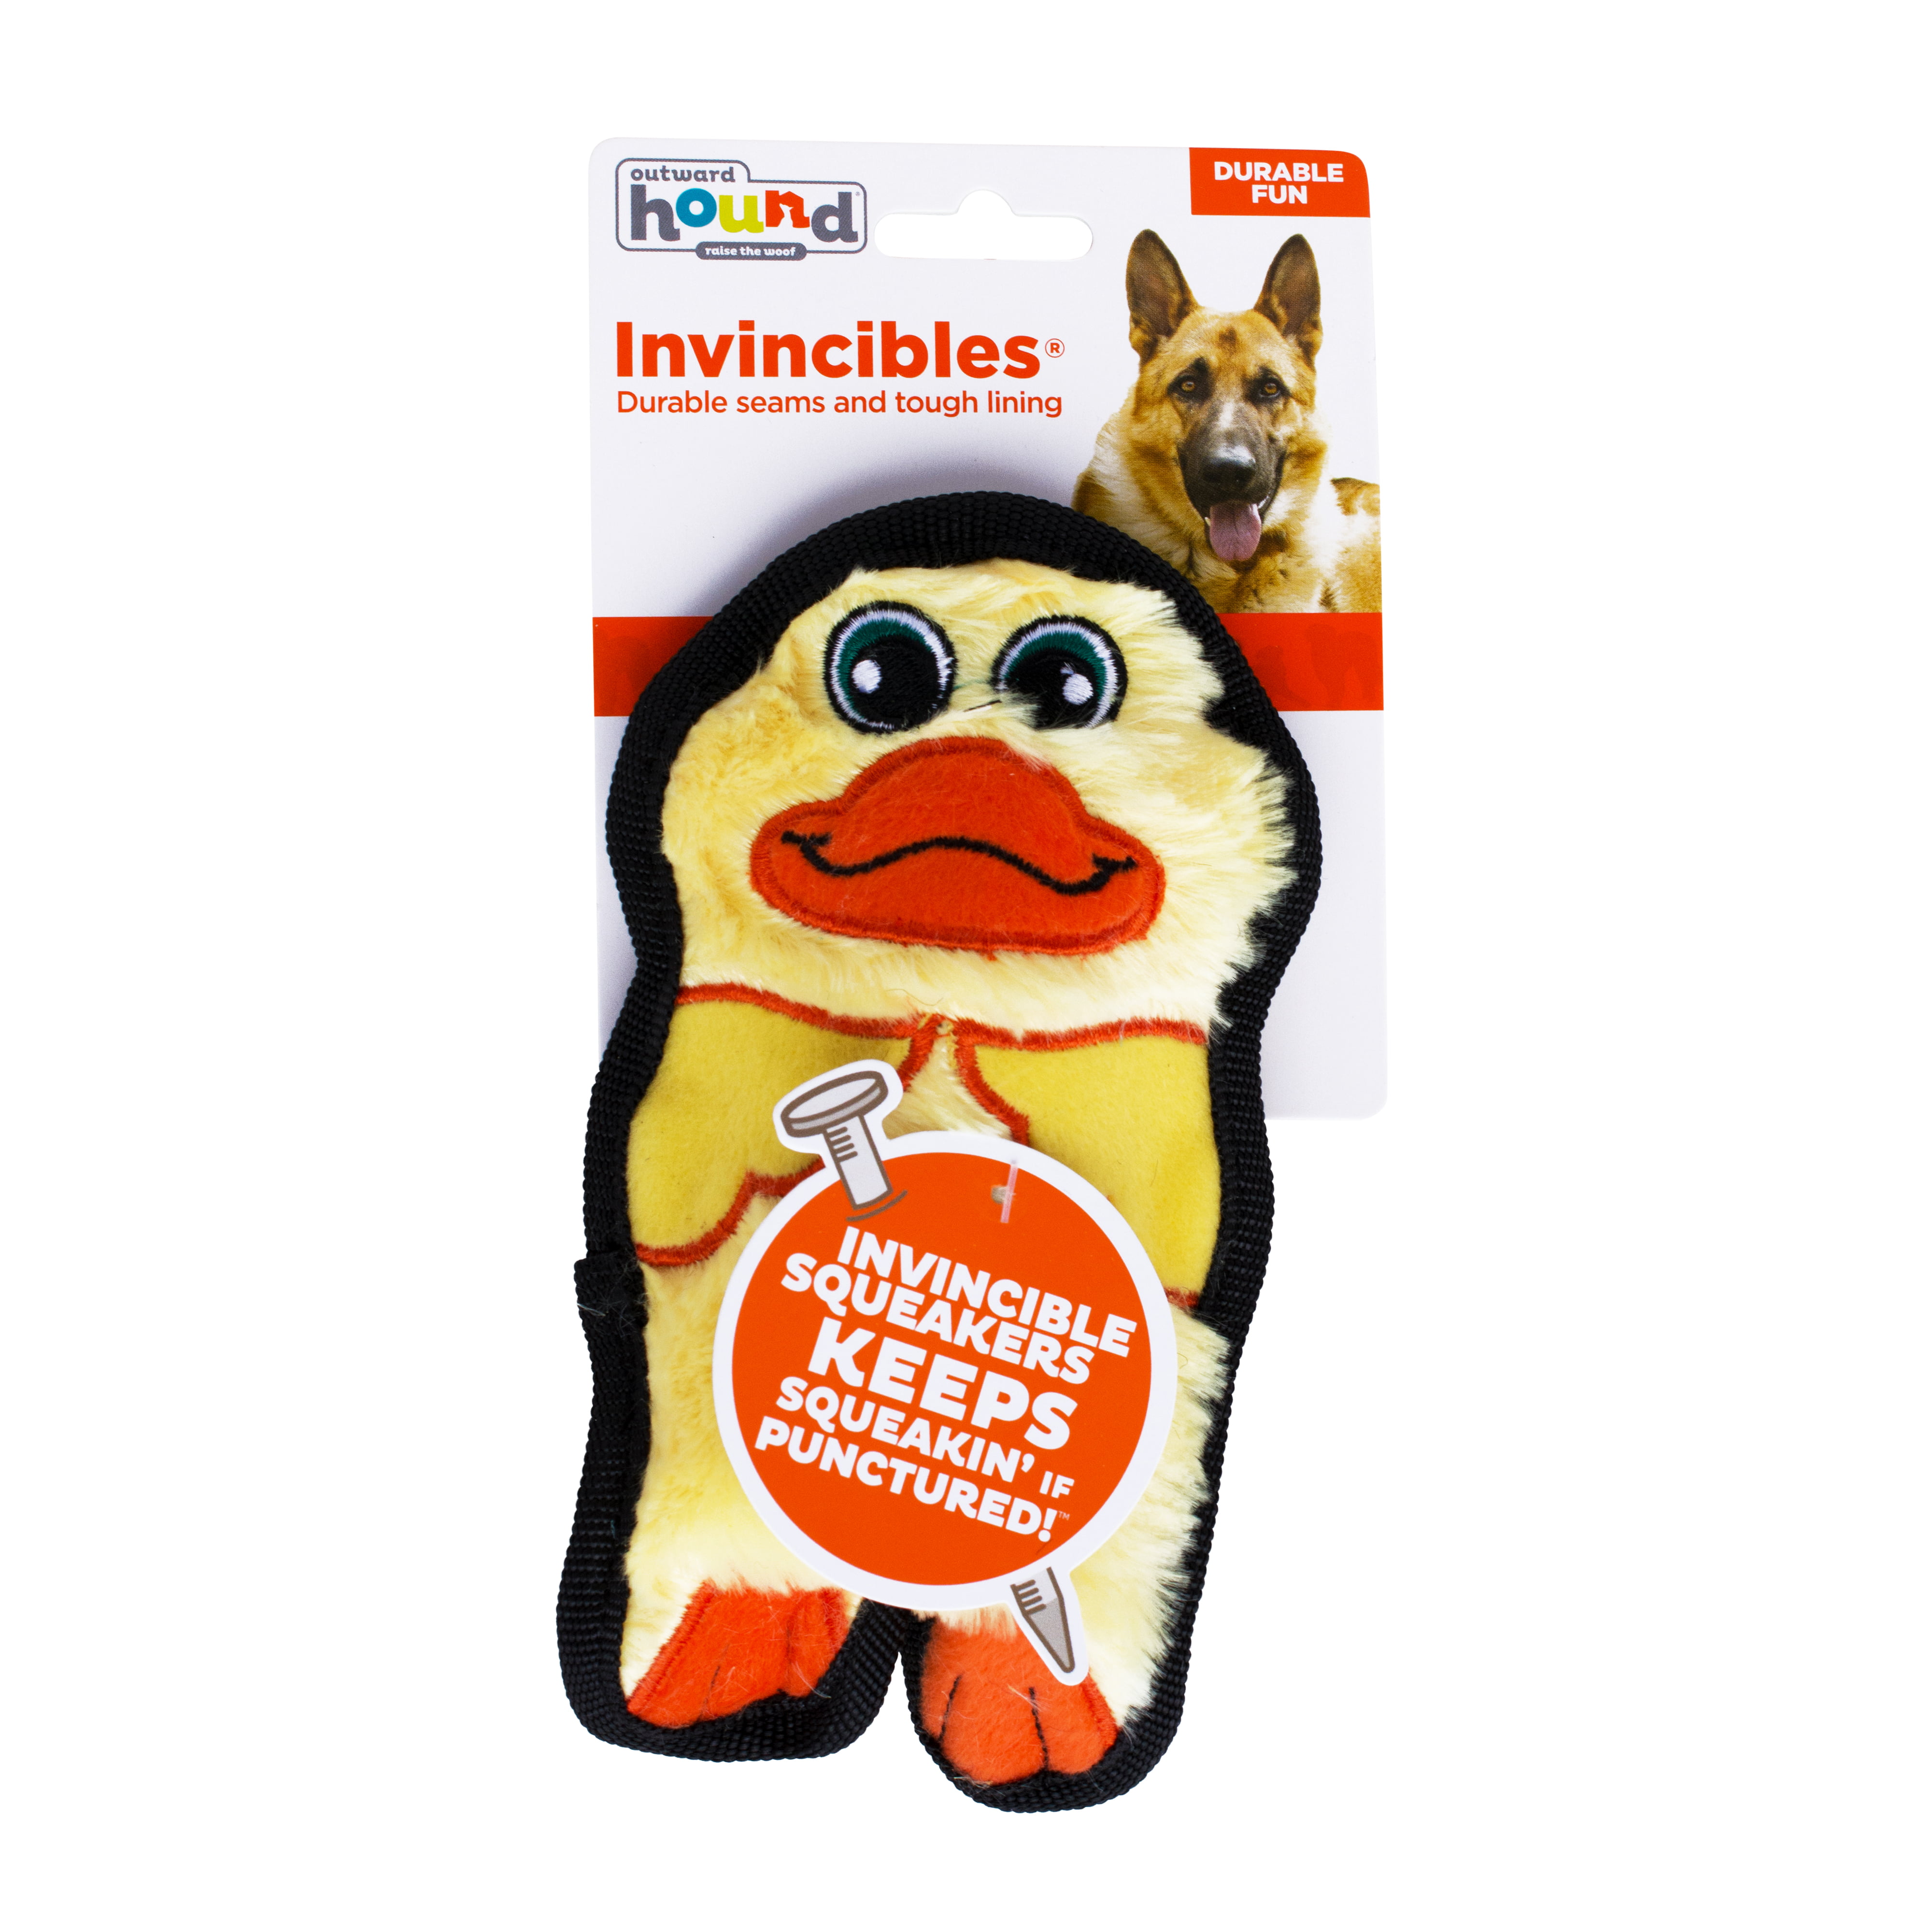 Outward Hound Invincibles Gecko Red/Orange Squeaky Dog Toy - Granite Bay,  CA - Douglas Feed and Pet Supply Pickup